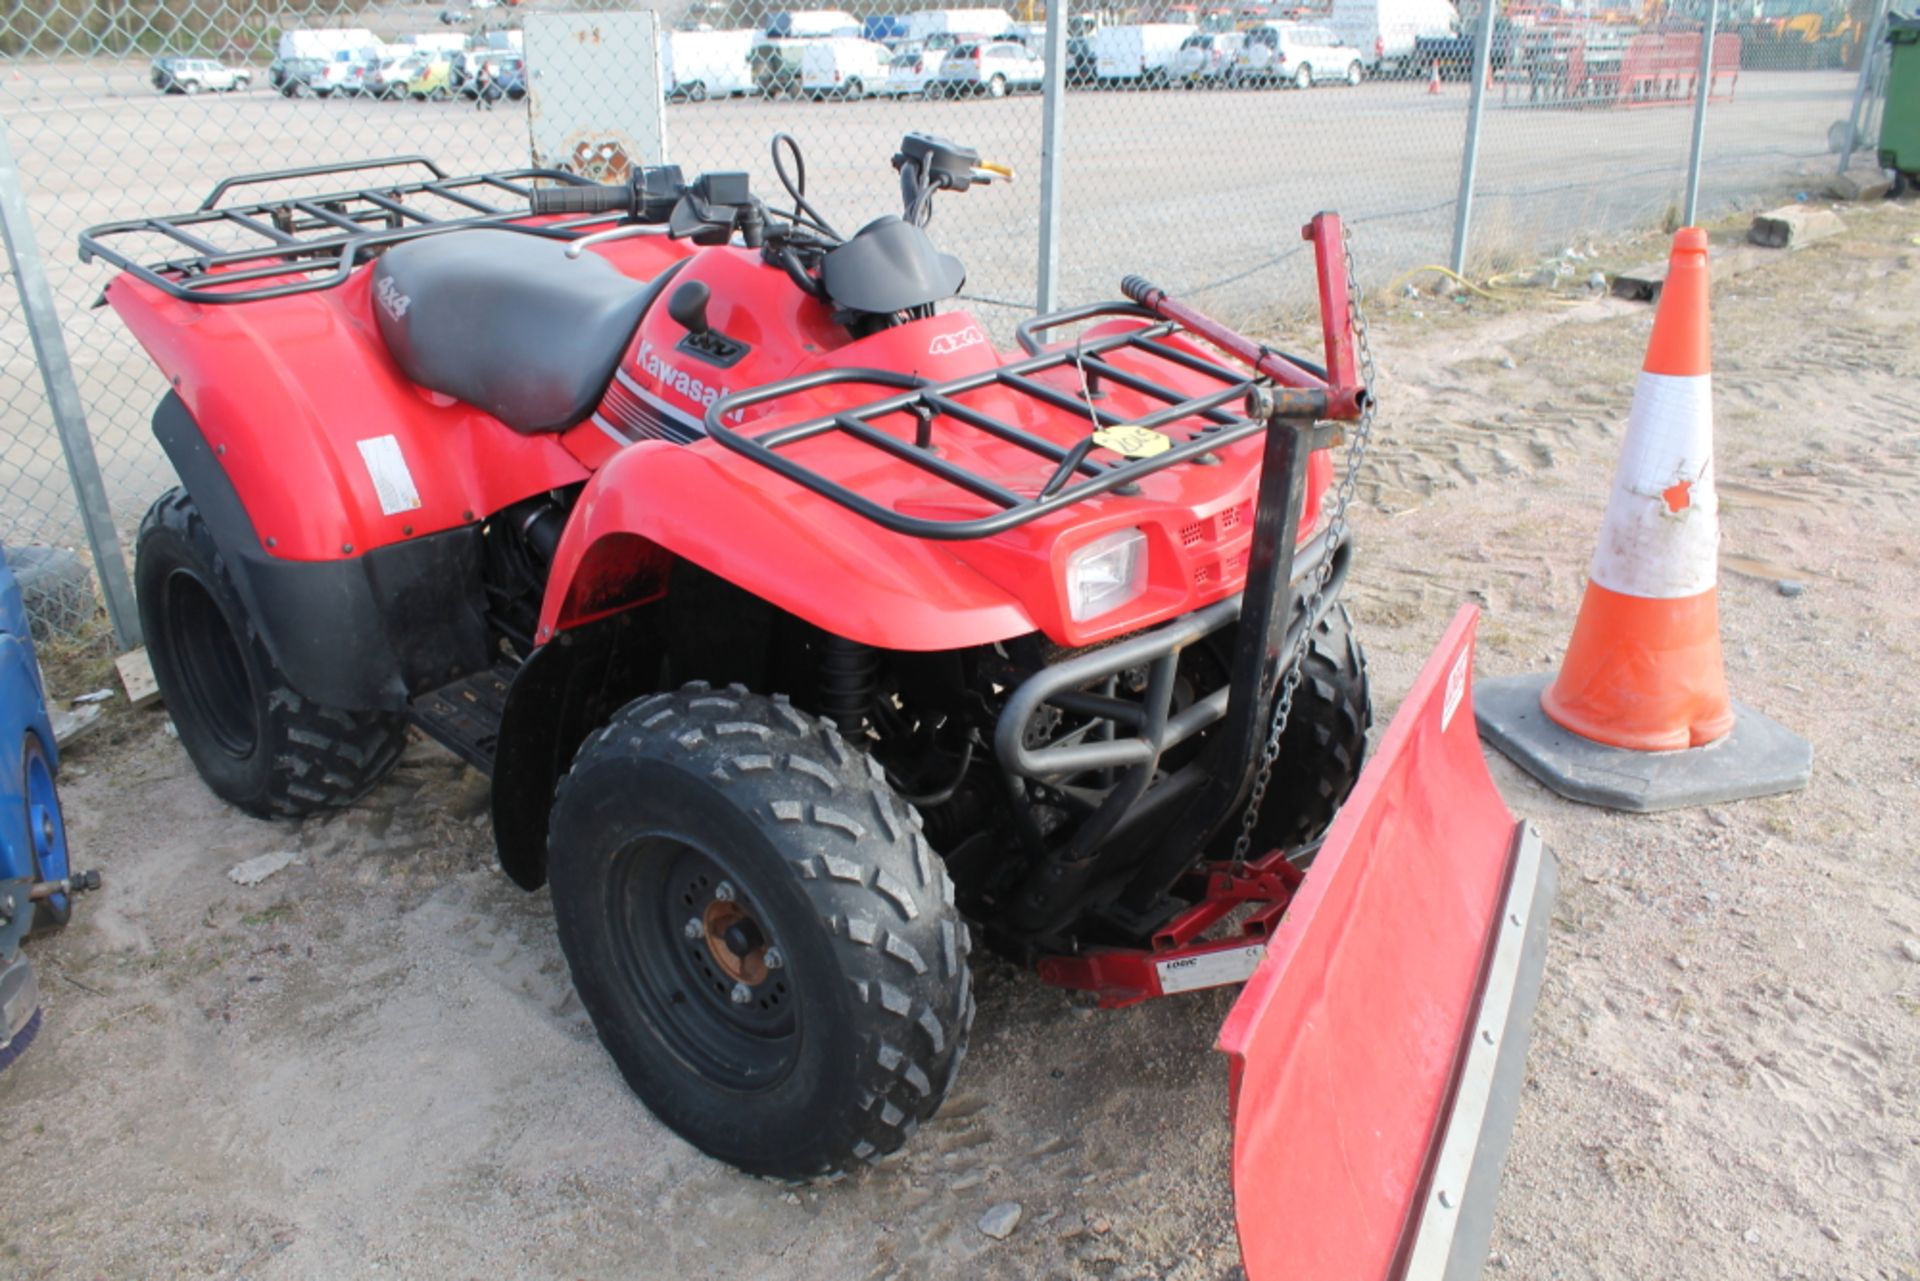 Sale Item:   KAWASAKI KVF 360, SUB CHASSIS  & SNOW BLADE FITTED KEY IN P/CABIN   Vat Status: